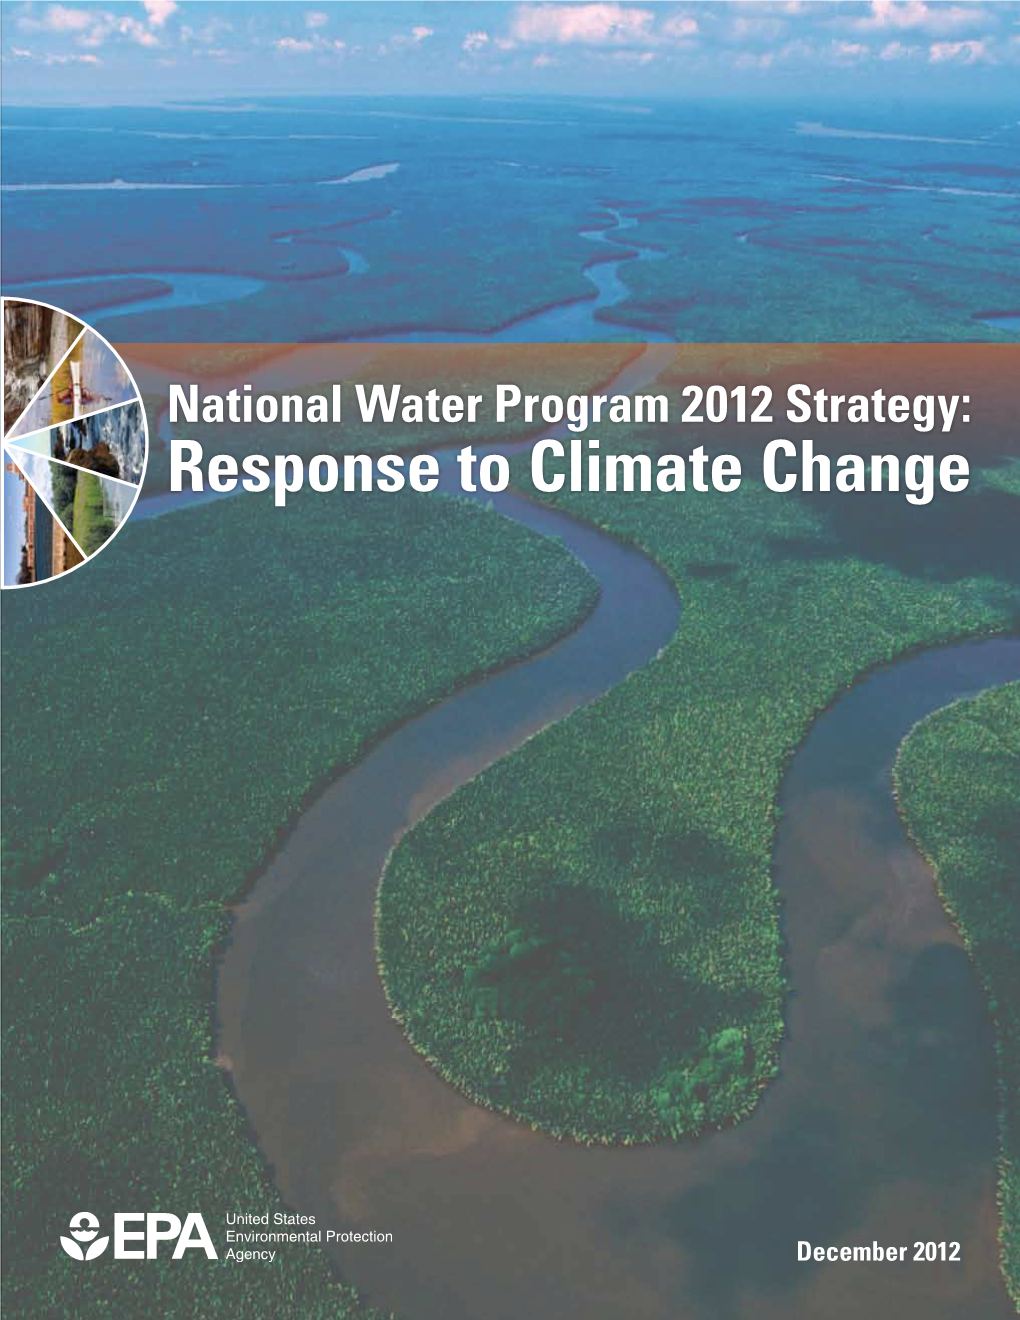 National Water Program 2012 Strategy: Response to Climate Change Builds on the Momentum Gained While Implementing the 2008 Strategy